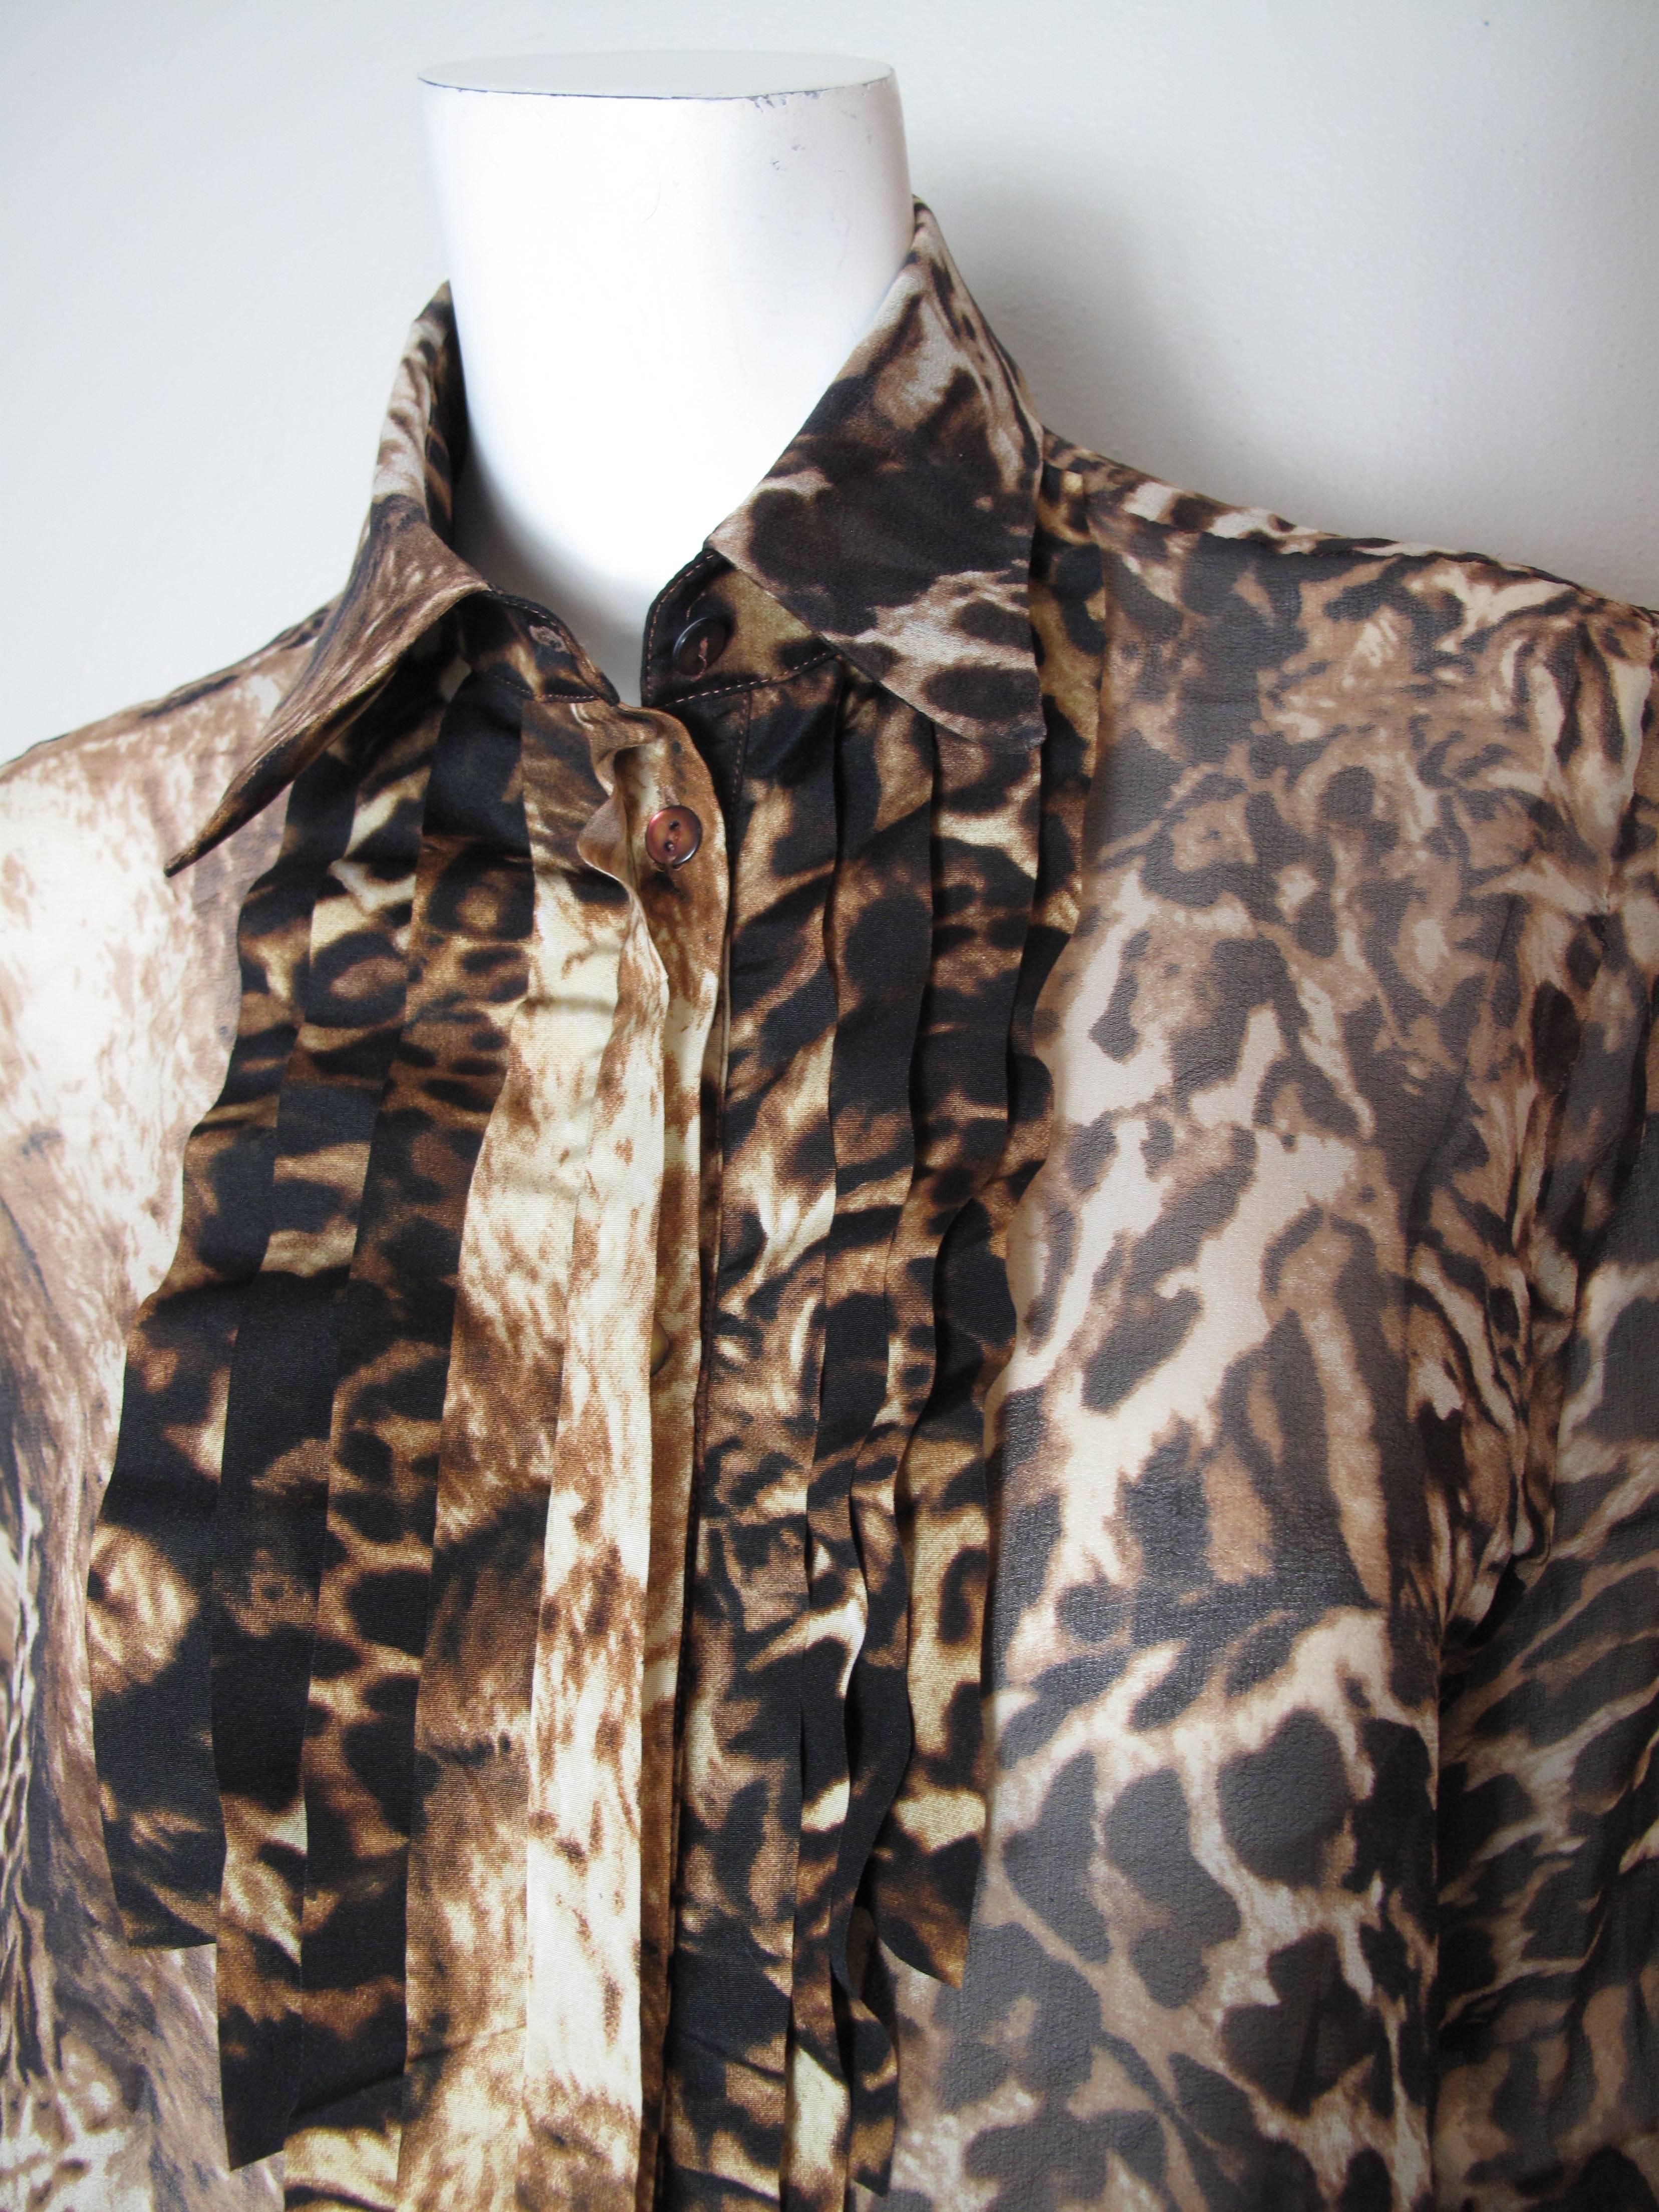 Kenzo sheer poly leopard ruffle blouse.  Condition: Excellent. Size  42

We accept returns for refund, please see our terms.  We offer free ground shipping within the US. Let us know if you have any questions. 